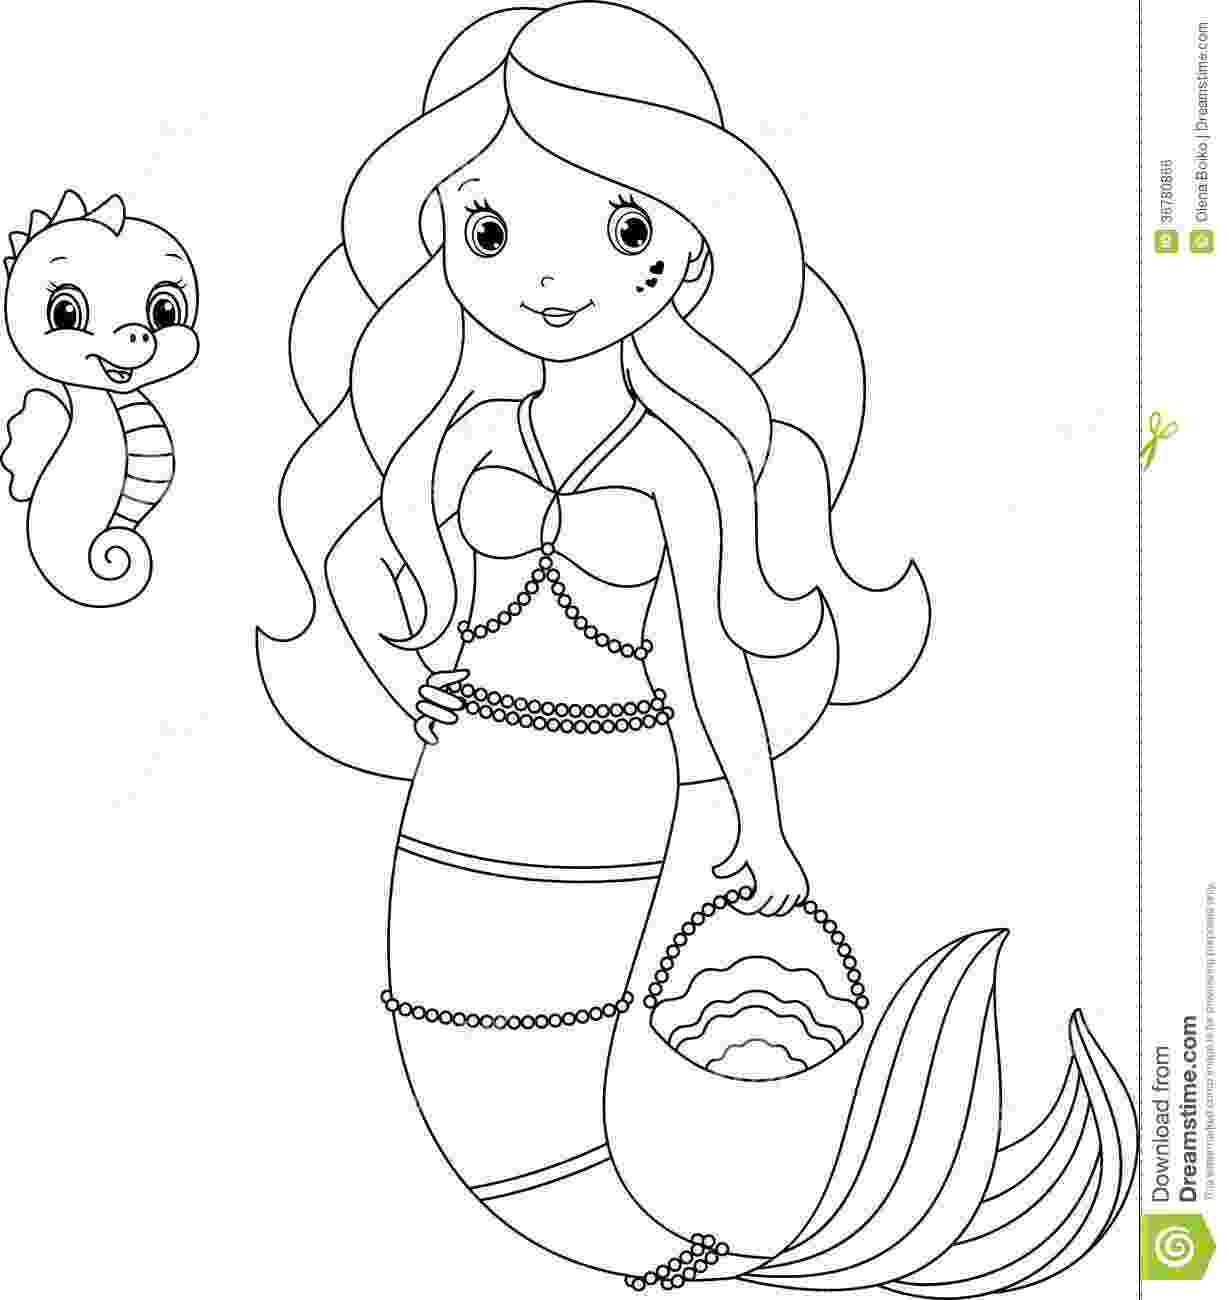 coloring sheets for girls to print coloring pages for girls 9 coloring kids for coloring girls sheets to print 